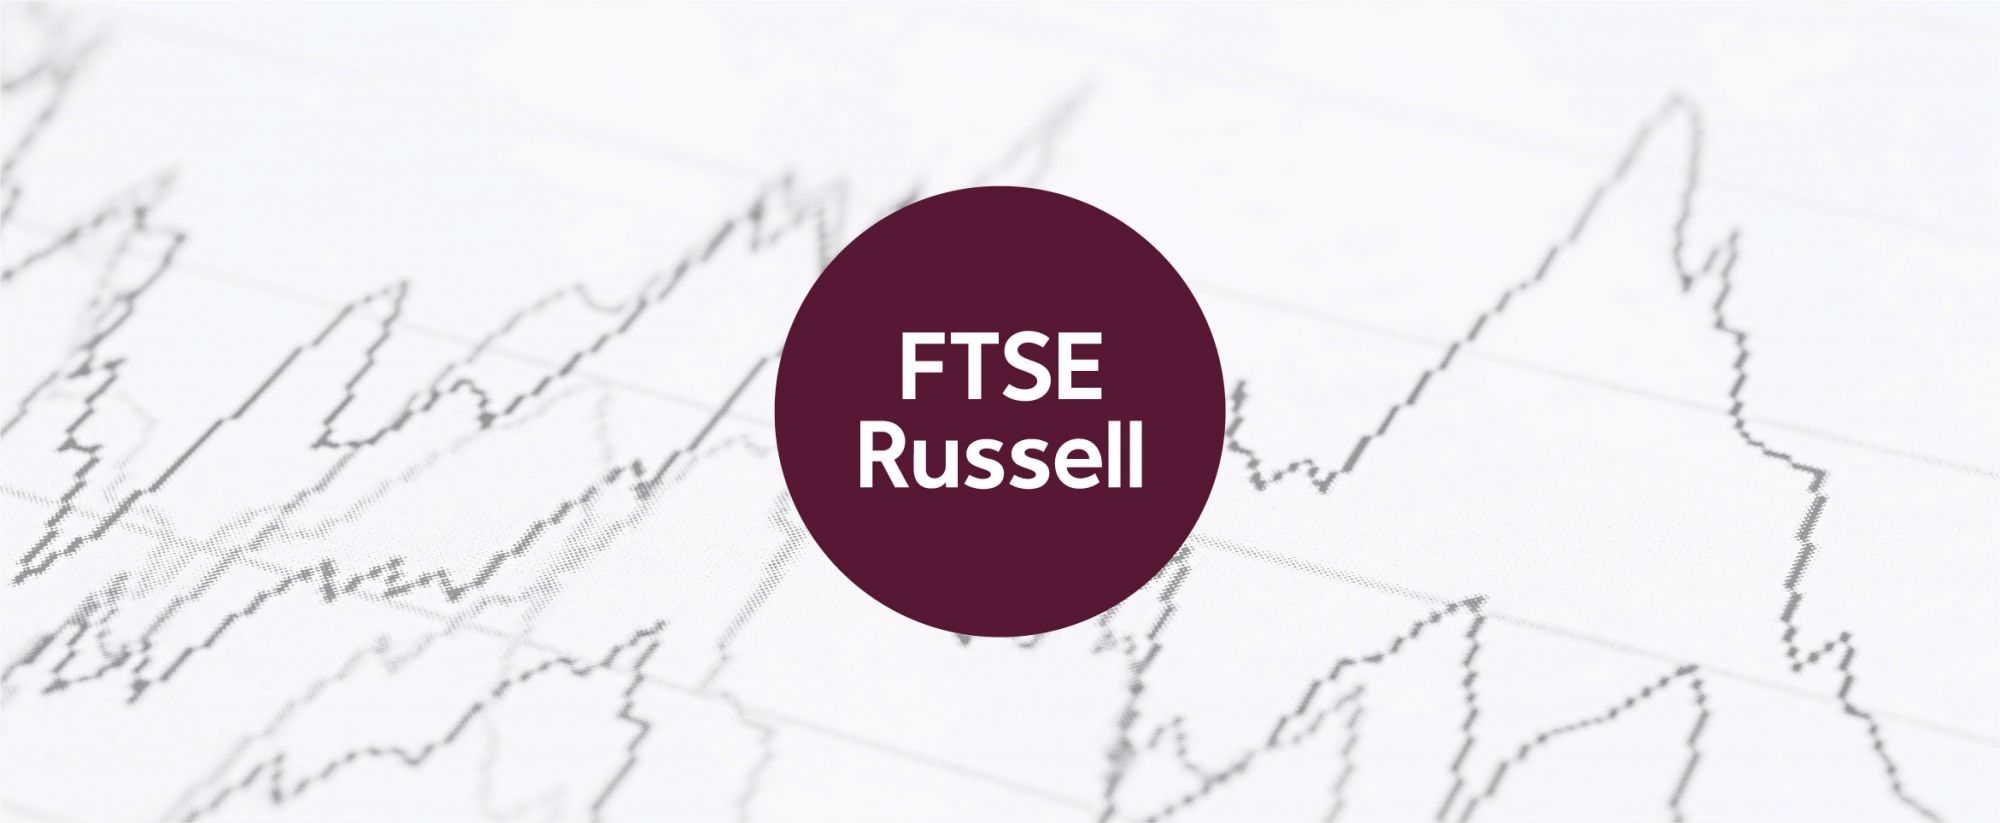 Multiply Group added to the FTSE global equity index series